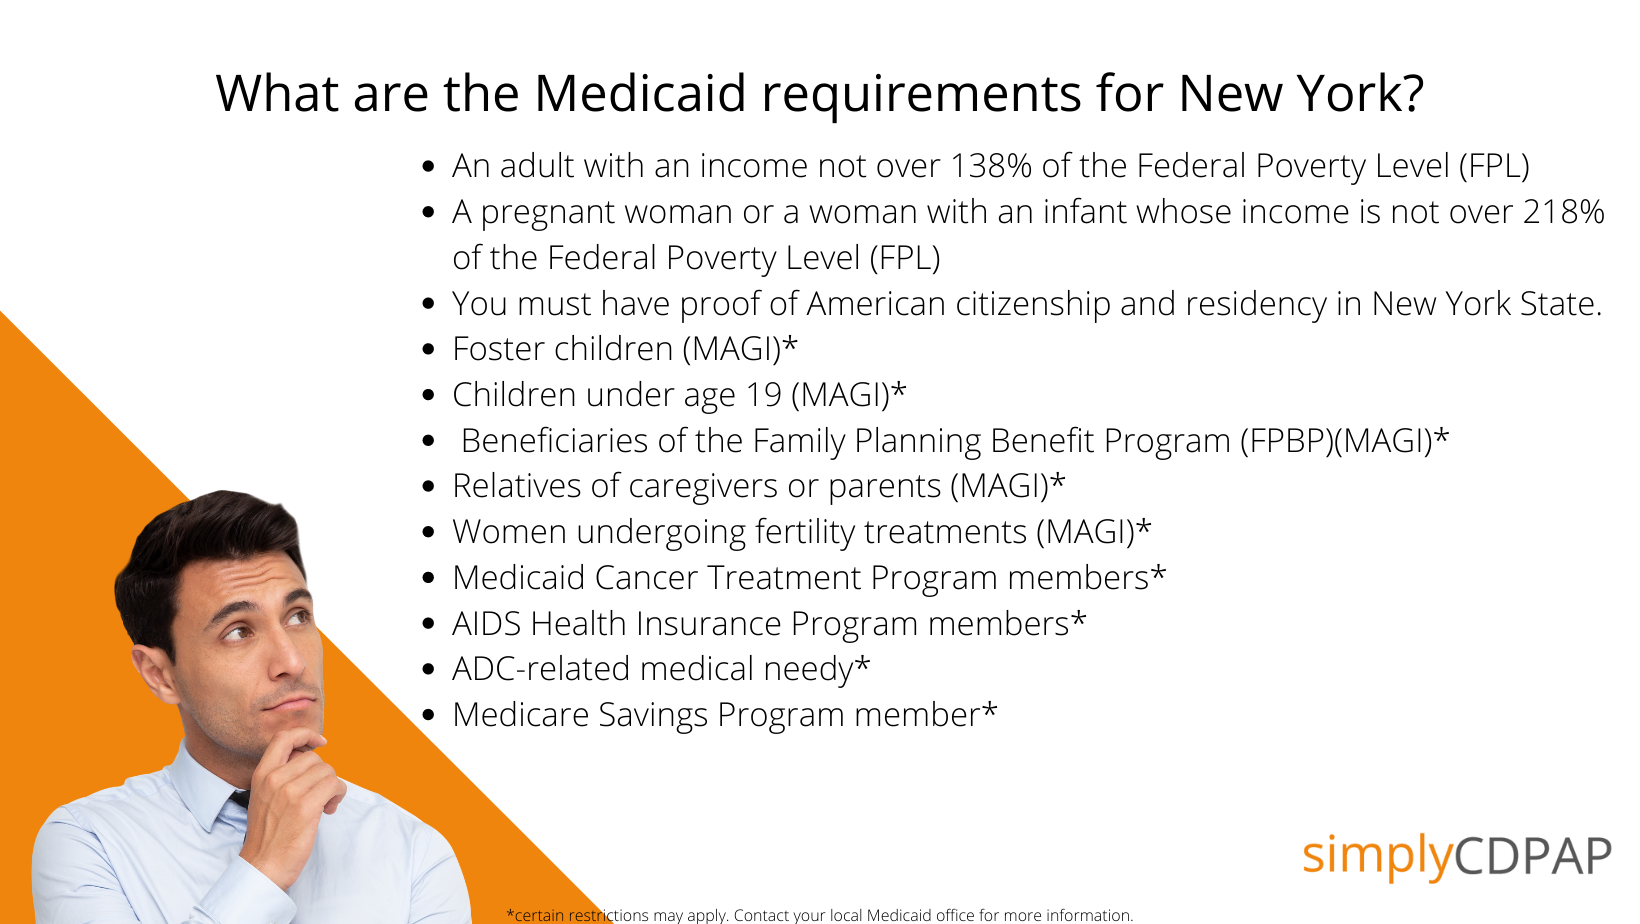 Medicaid requirements for CDPAP